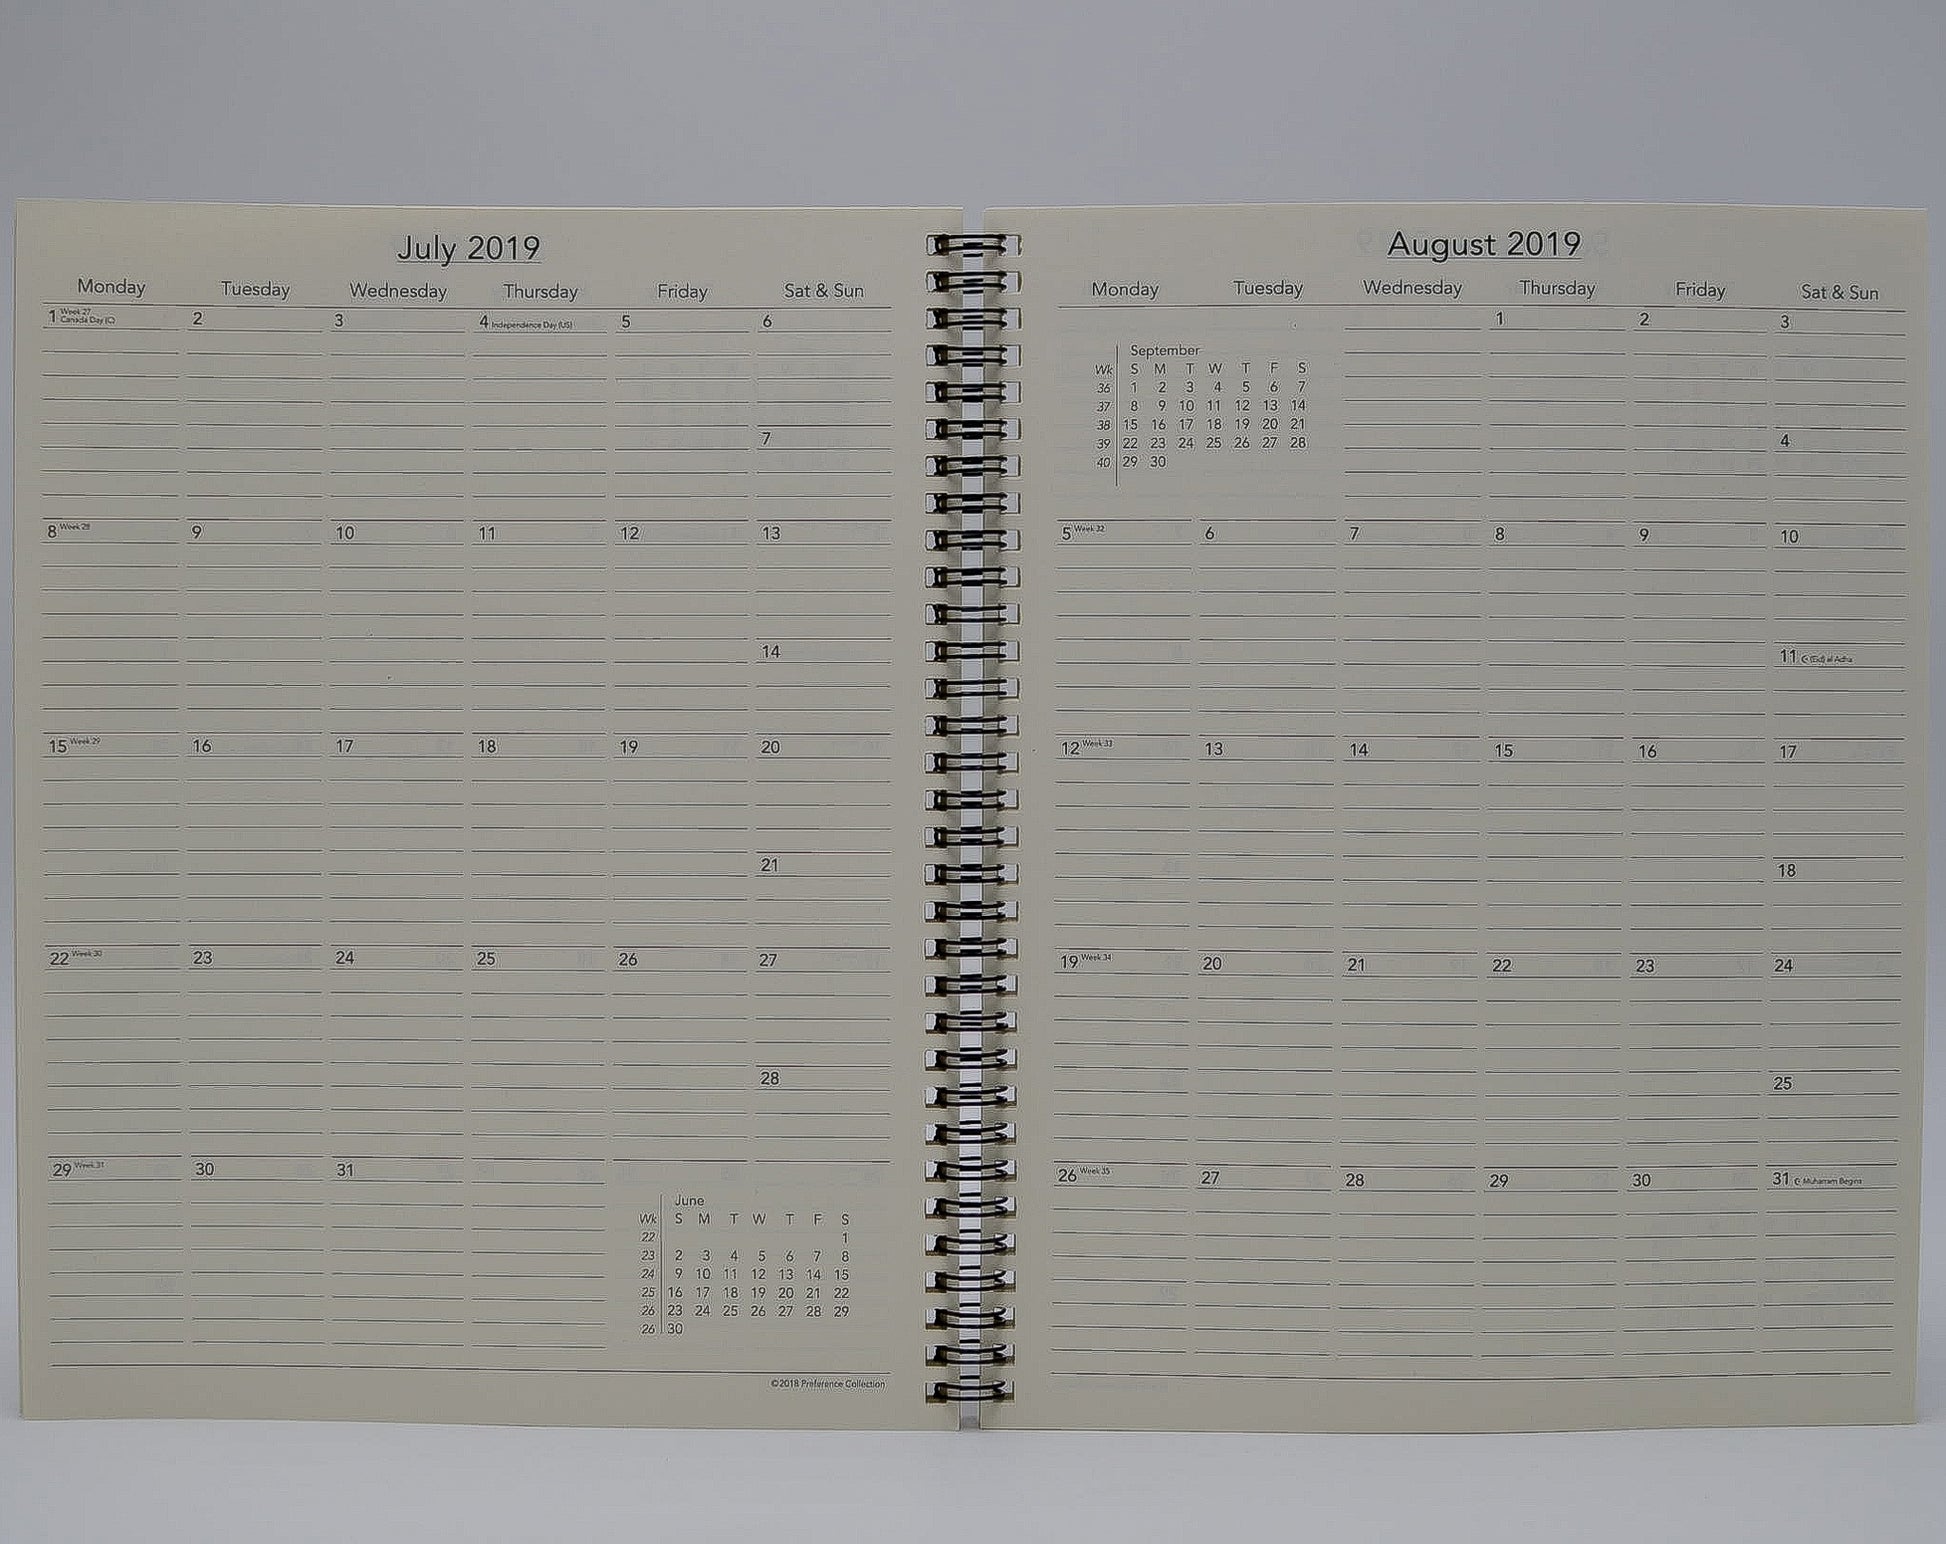 Preference Collection: PD18WI 8-1/2x11 Wirebound Planner monthly weekly calendar for 2019 or 2020 ivory wired 